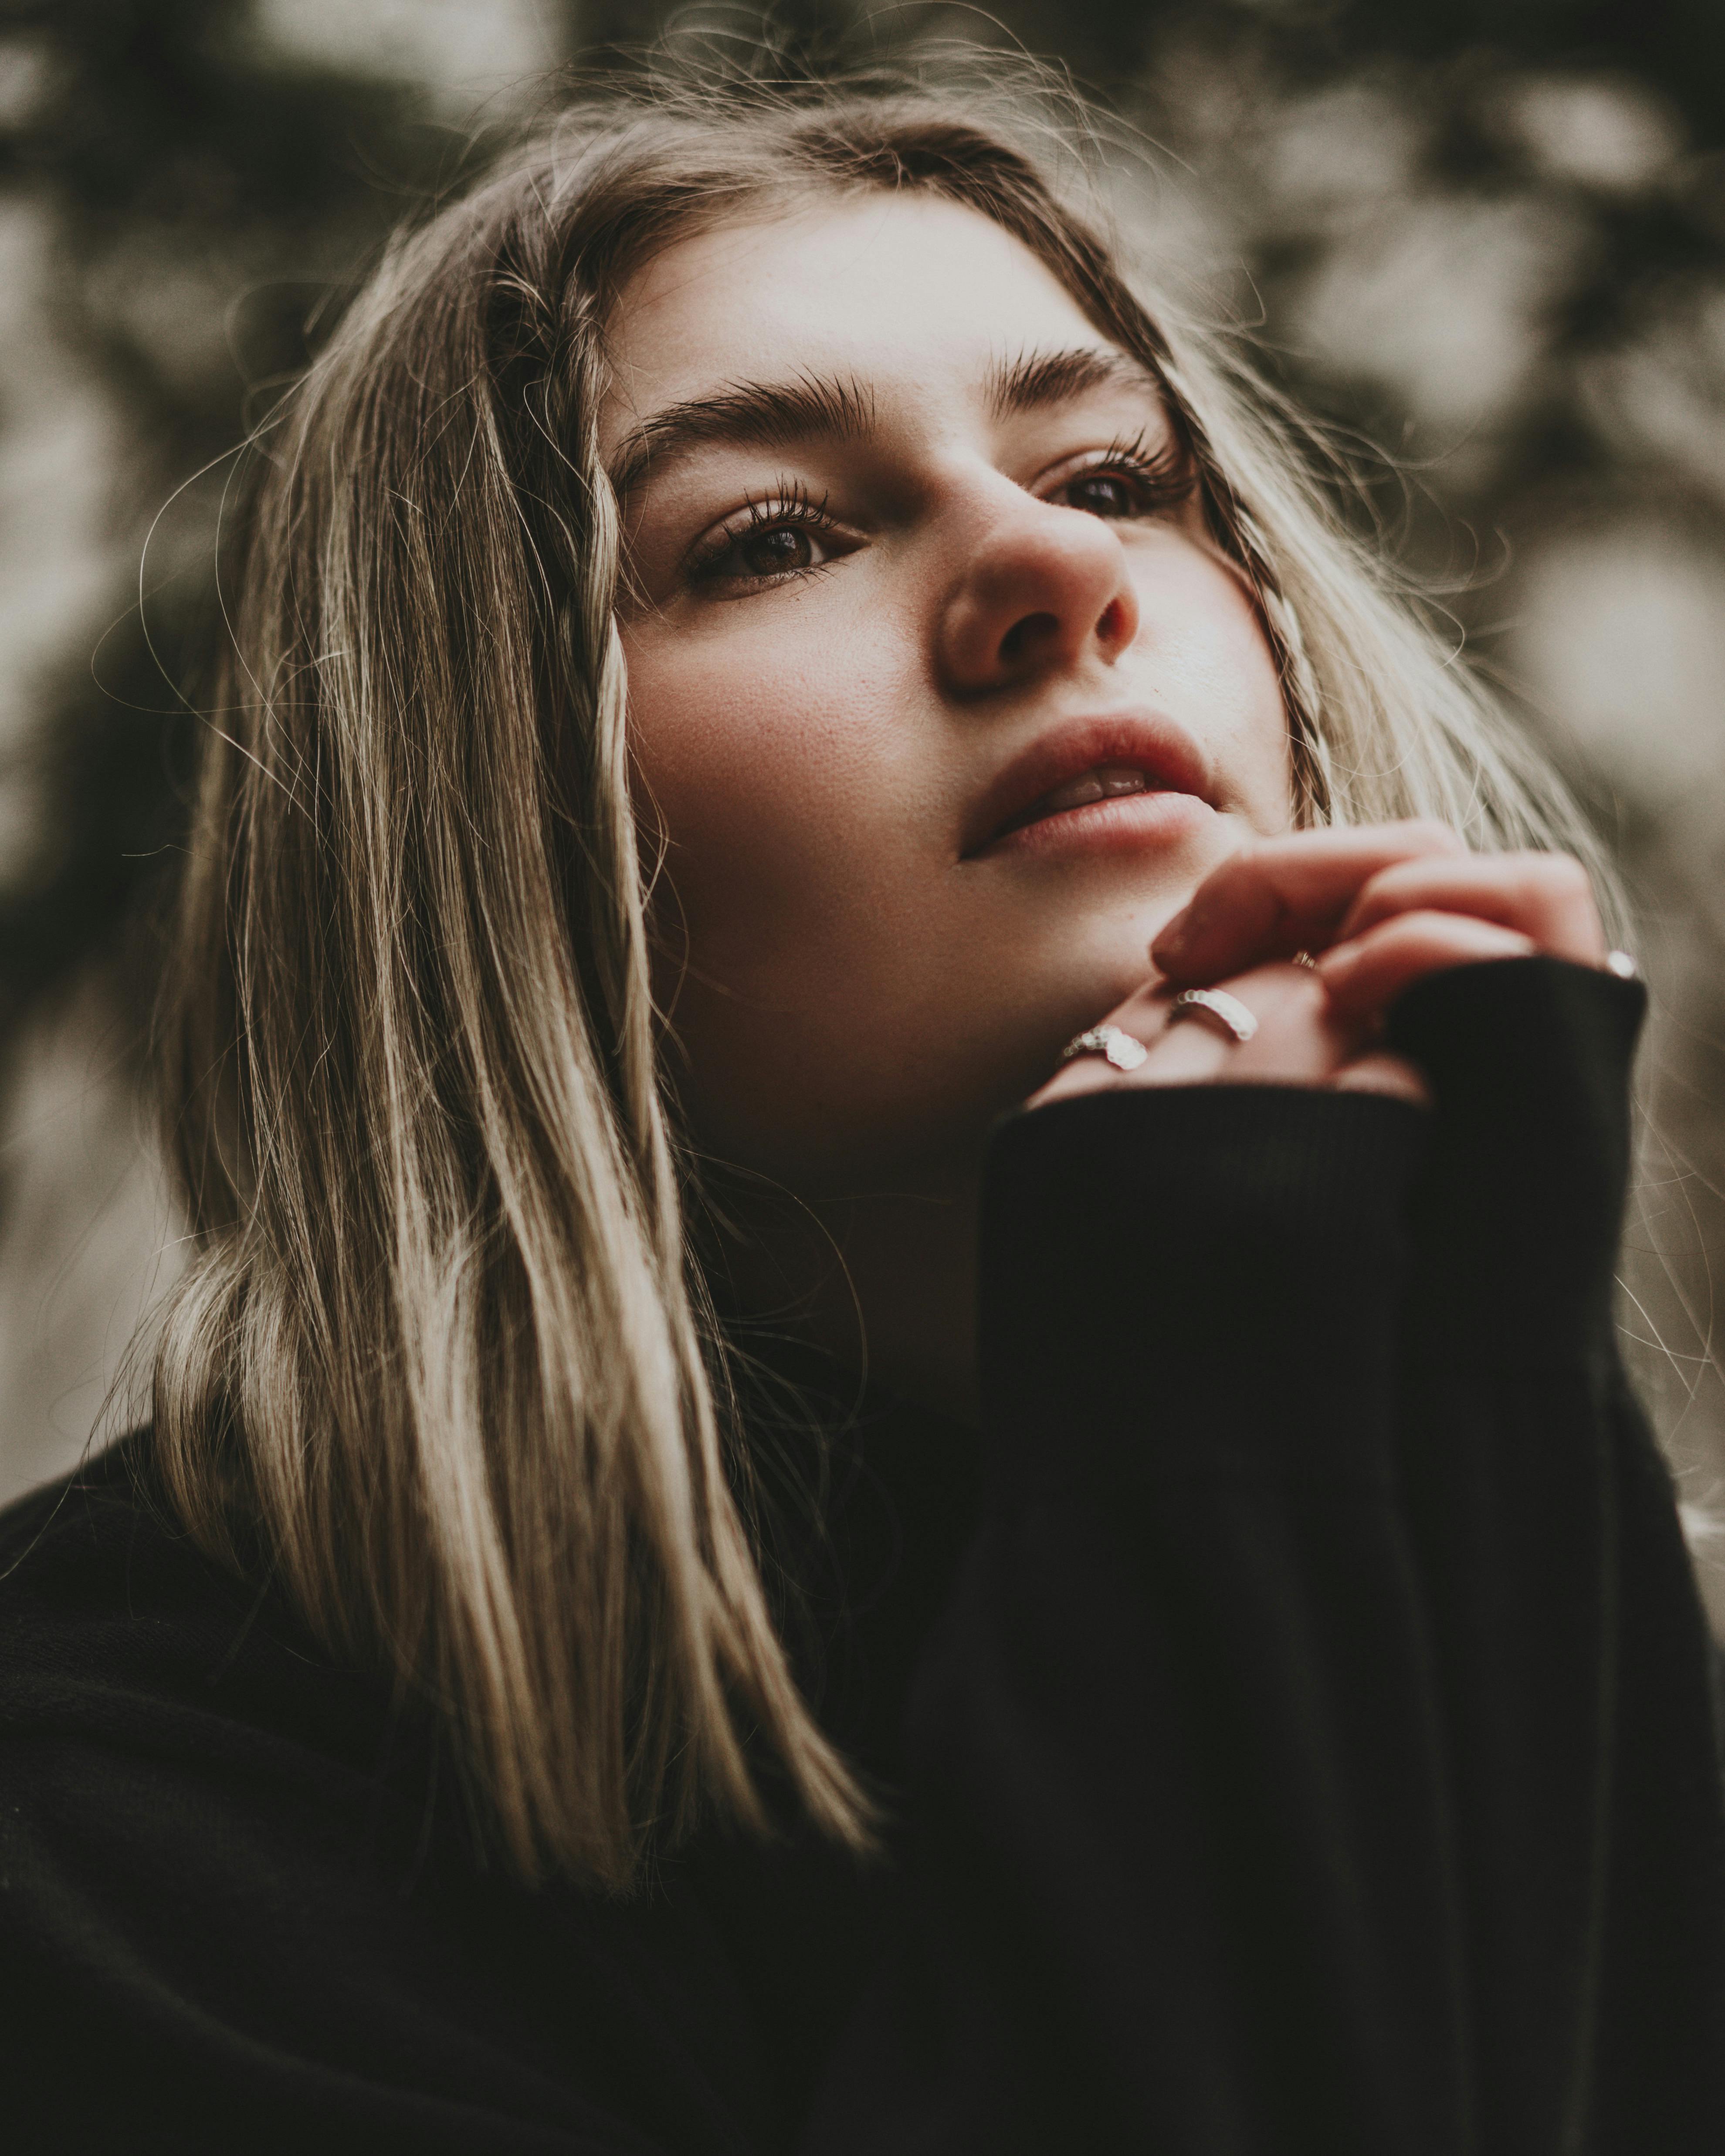 Woman deep in thought | Source: Pexels